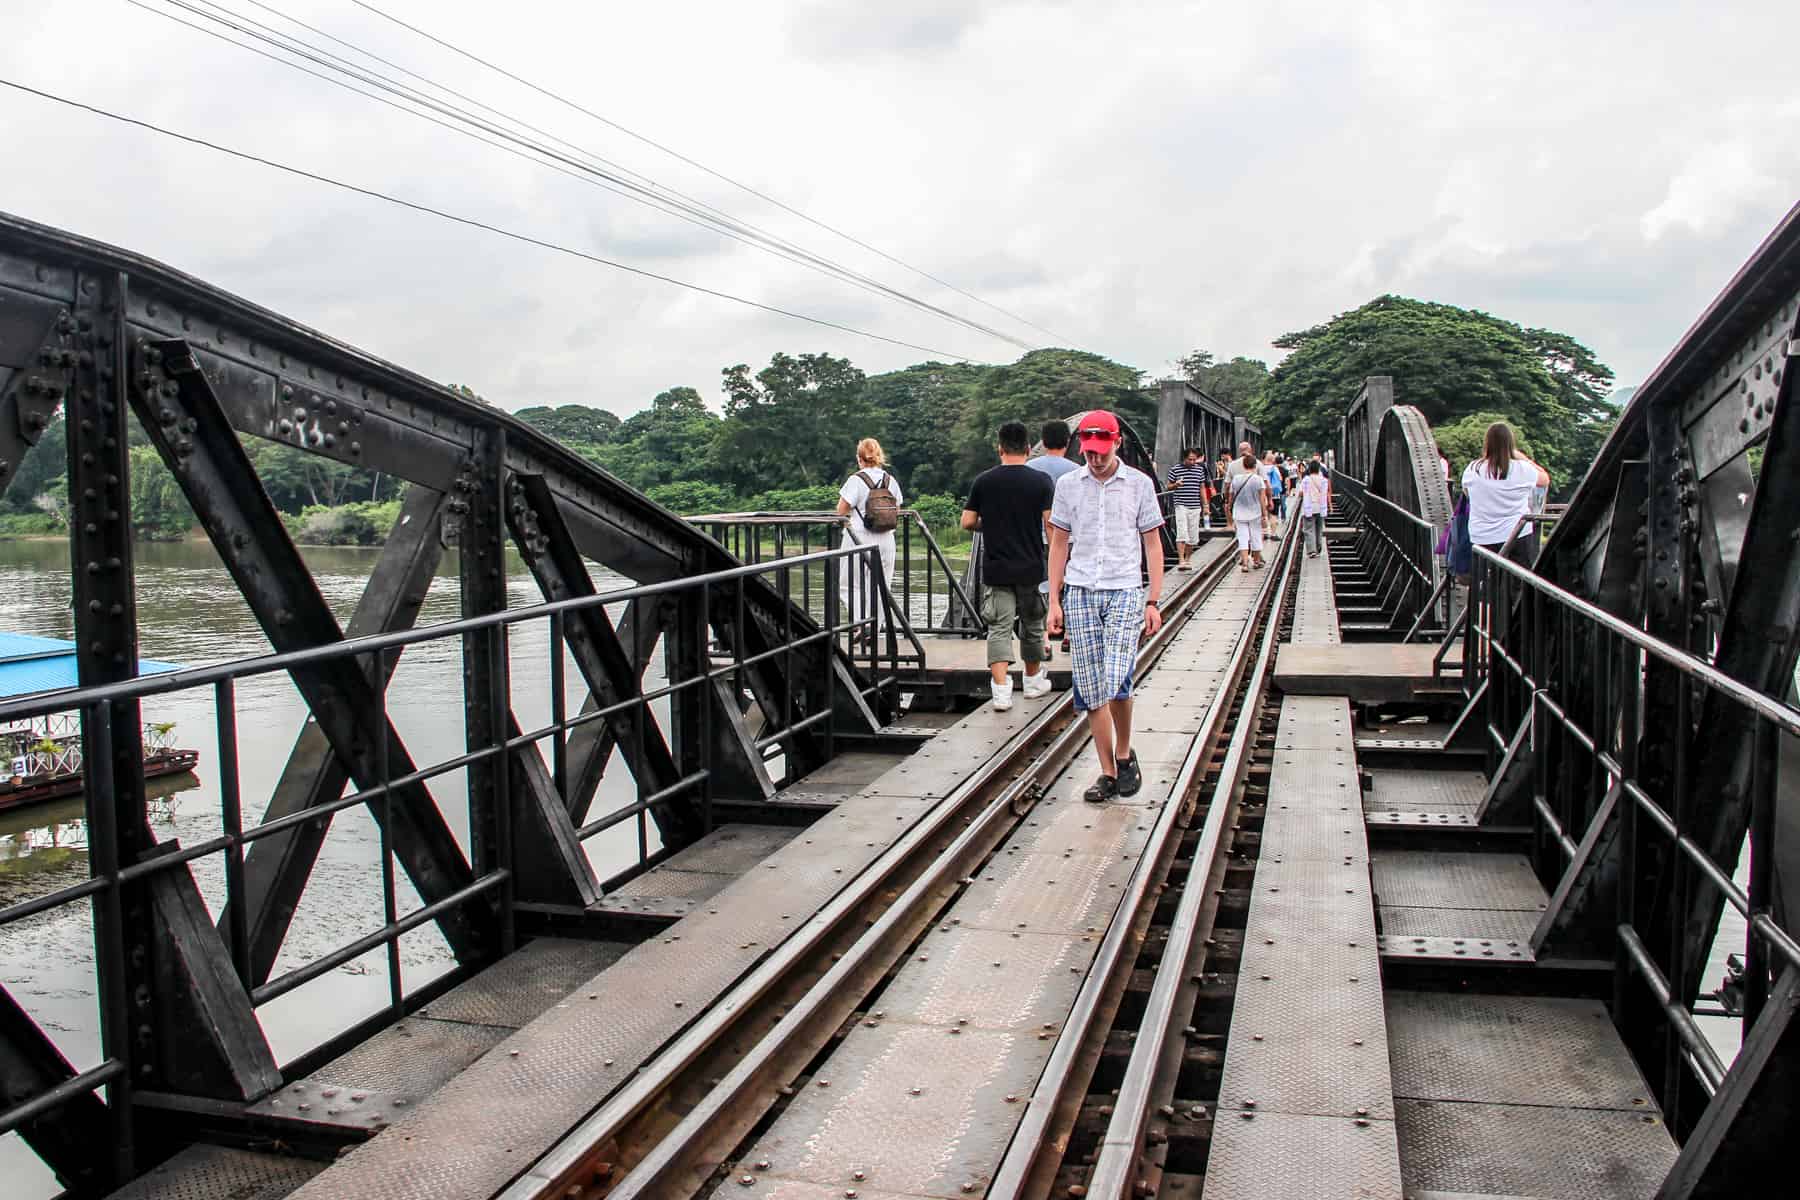 Tourists visiting the Bridge over the River Kwai in Thailand, walking on the Death Railway track and standing on the viewpoint ledges.